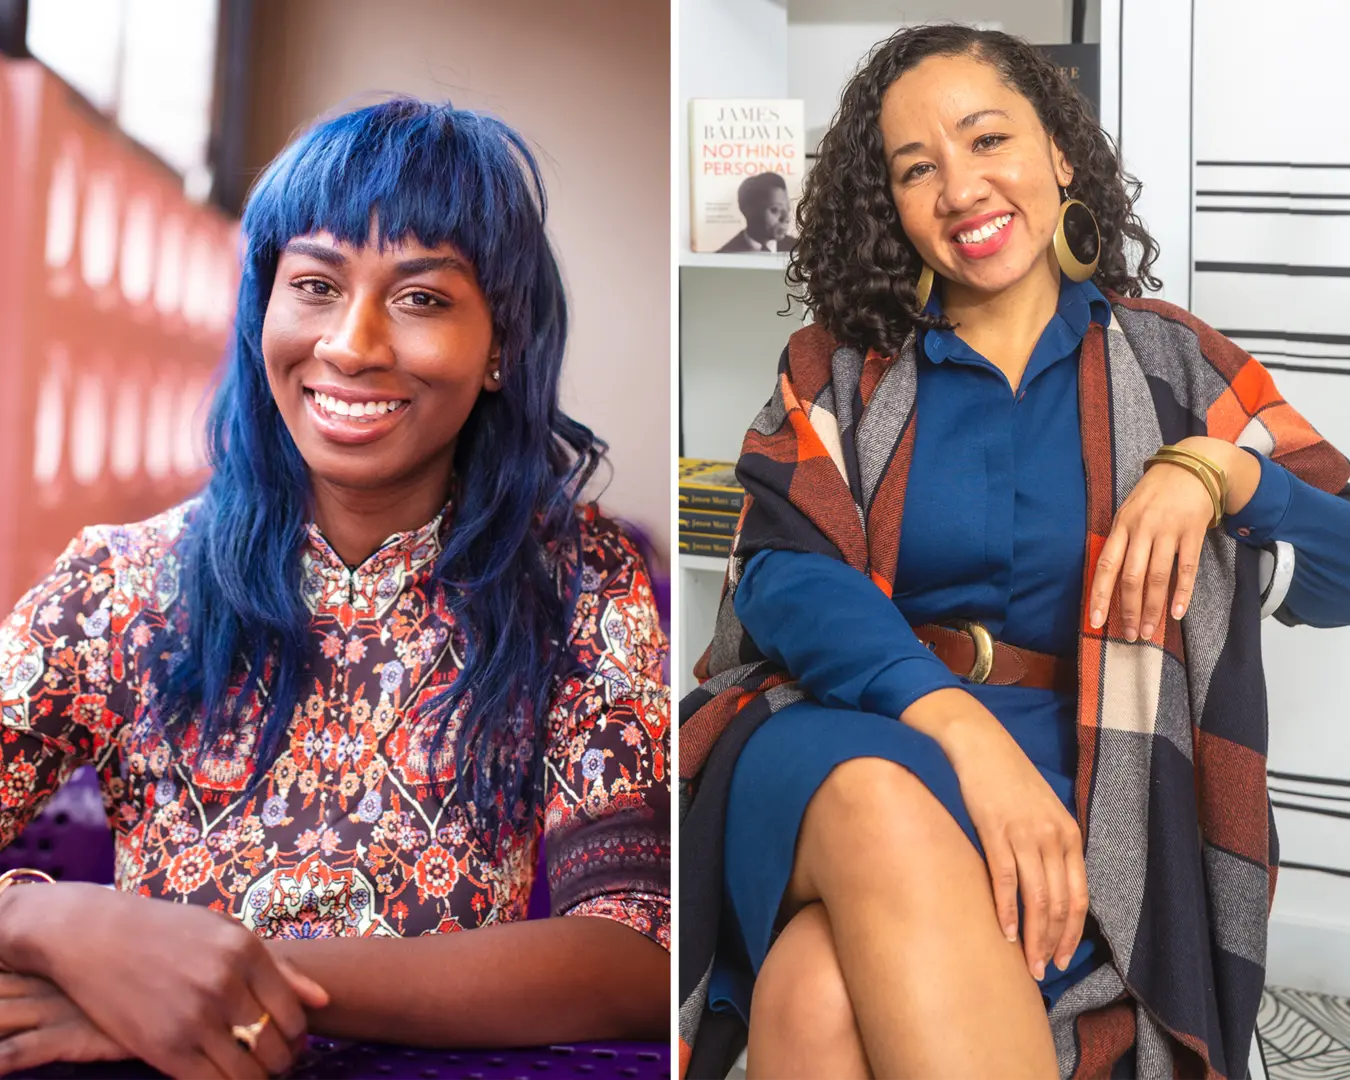 Sabaah Folayan and Camille Acker, 2022 Pew Fellows. Photos by Neal Santos.